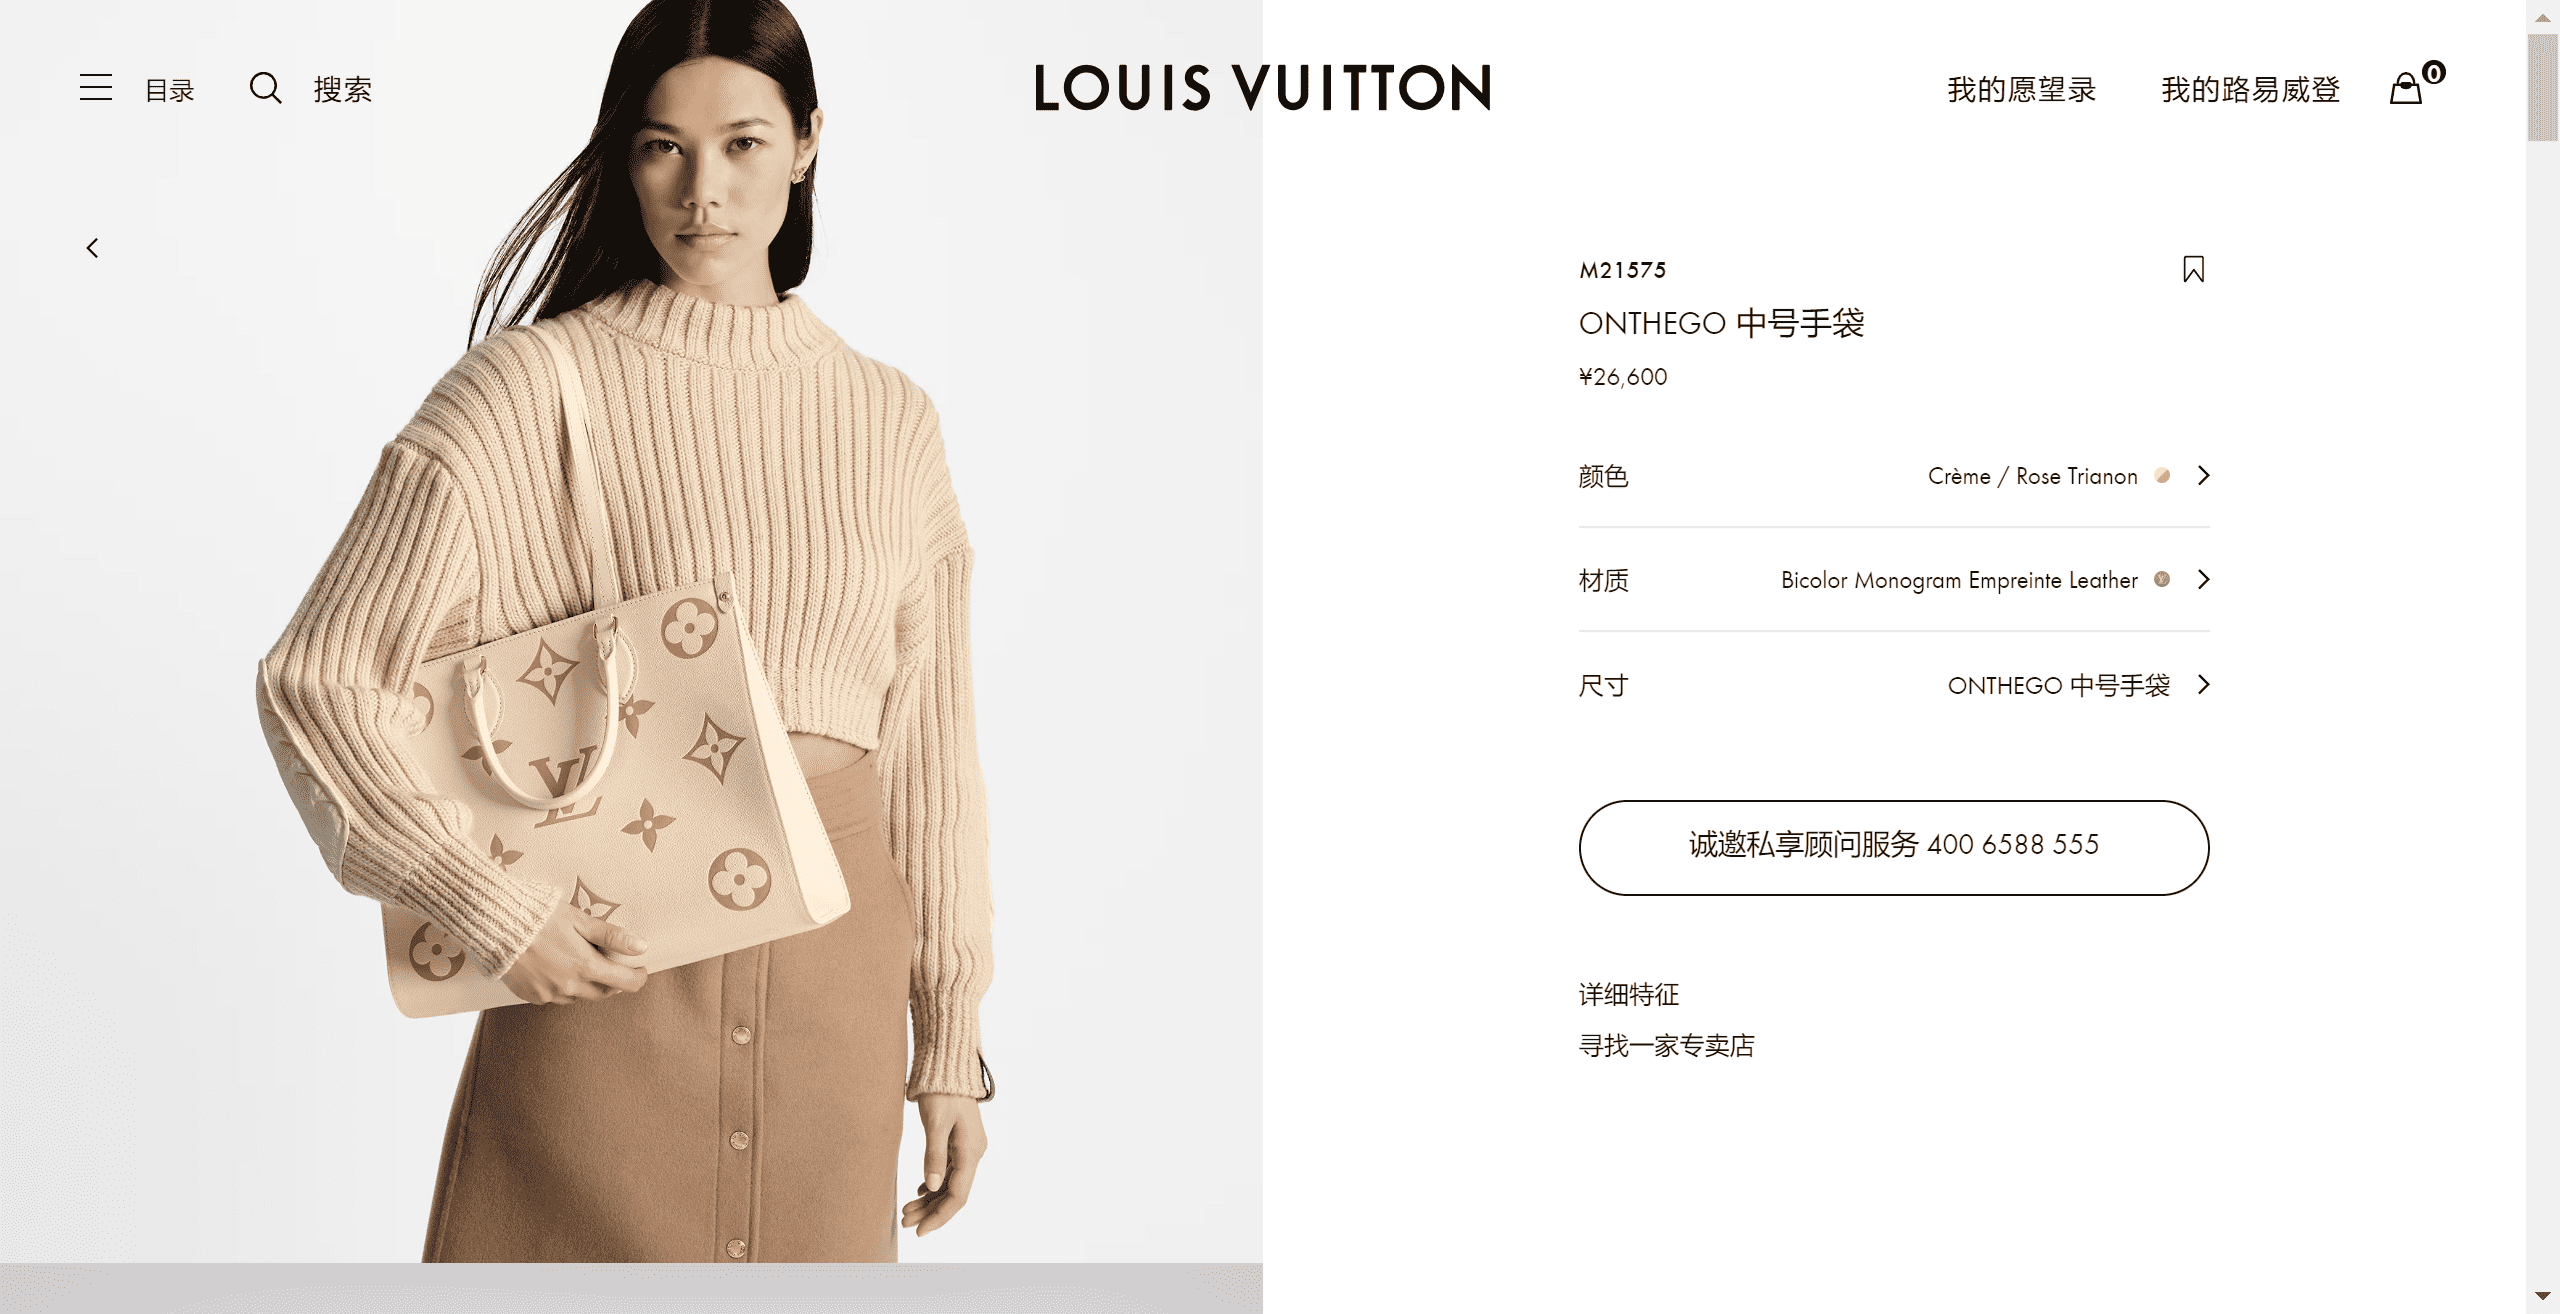 ONTHEGO----LV-LOUIS-VUITTON.png